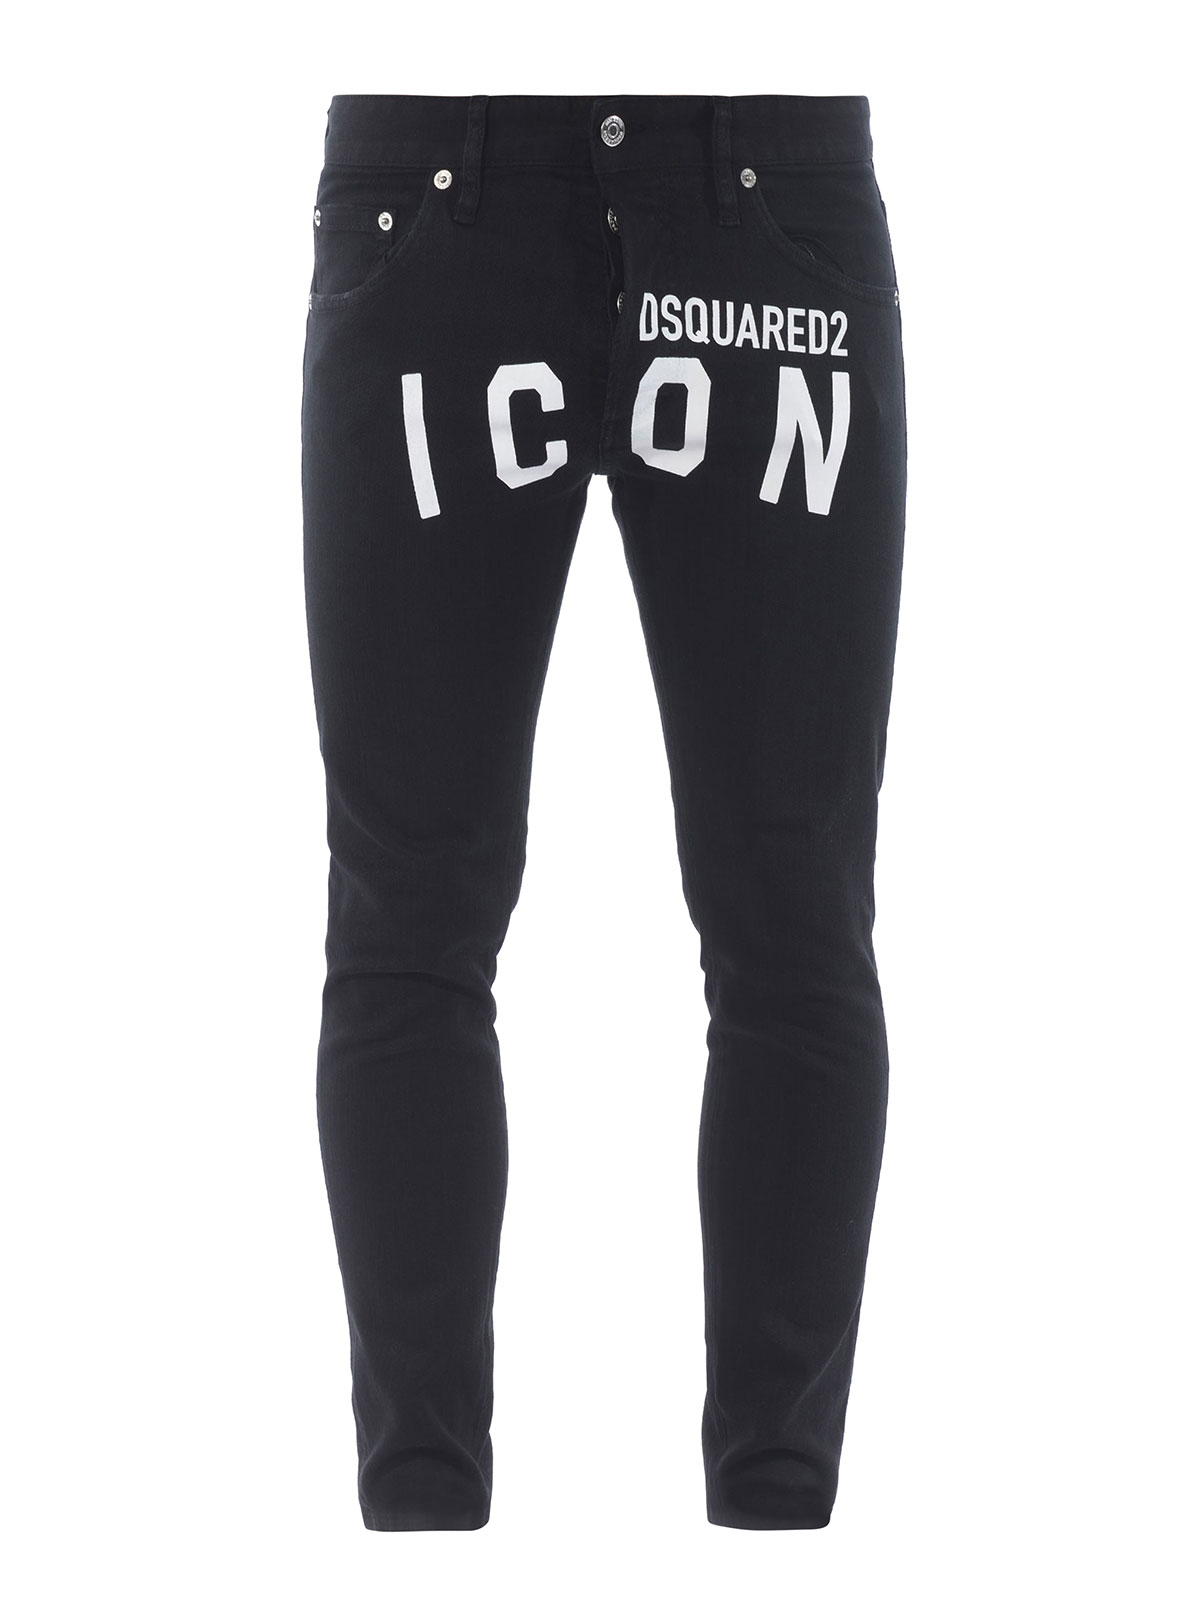 DSquared² Denim Icon Printed Skinny Jeans in Black Womens Jeans DSquared² Jeans 